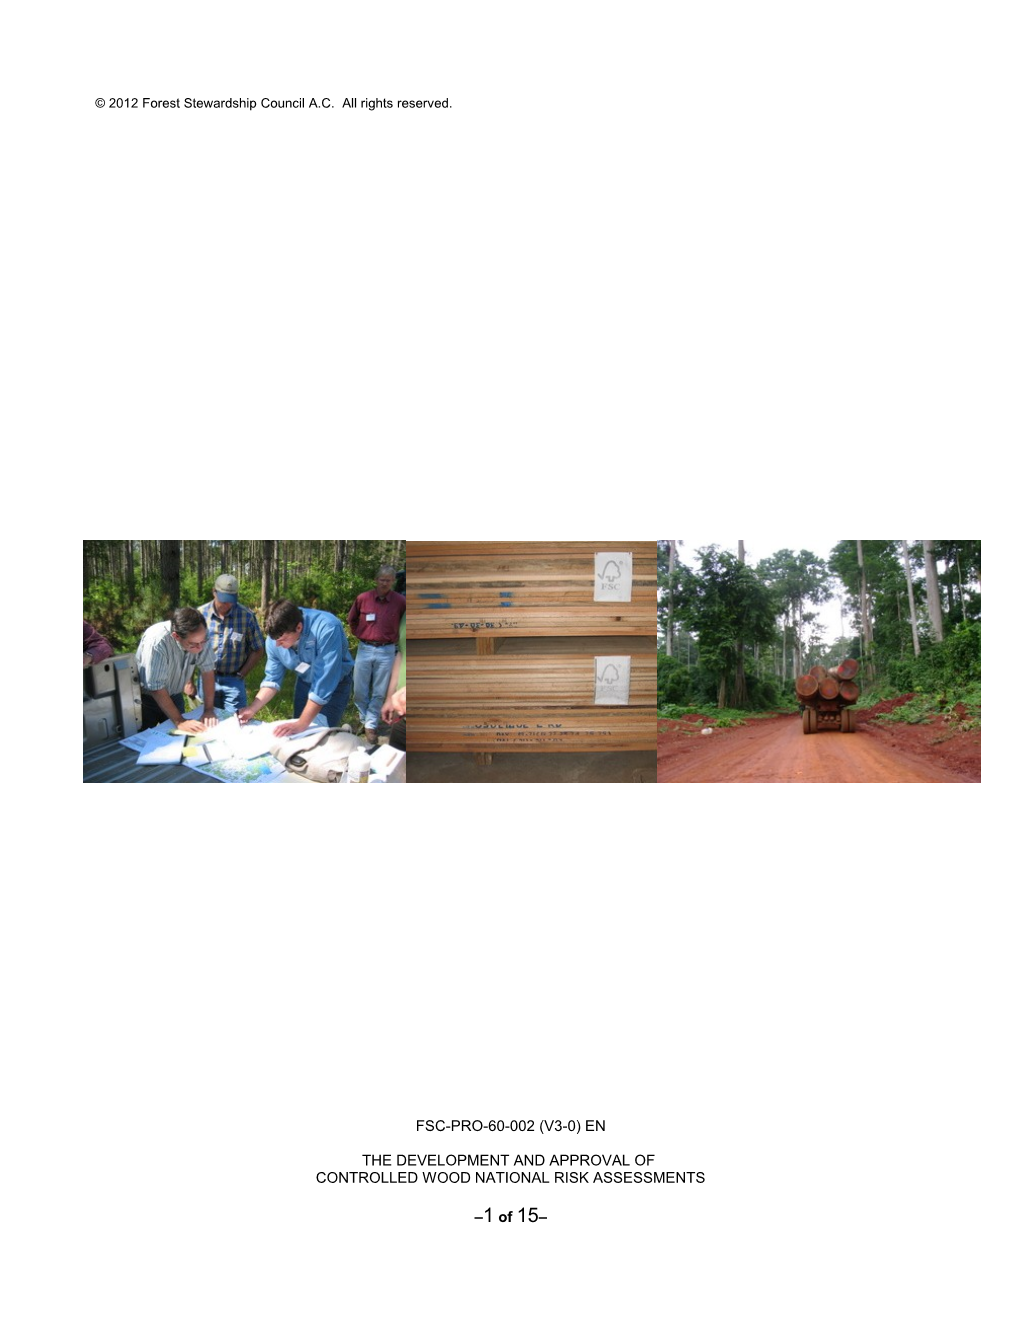 The Development and Approval of Controlled Wood National Risk Assessments